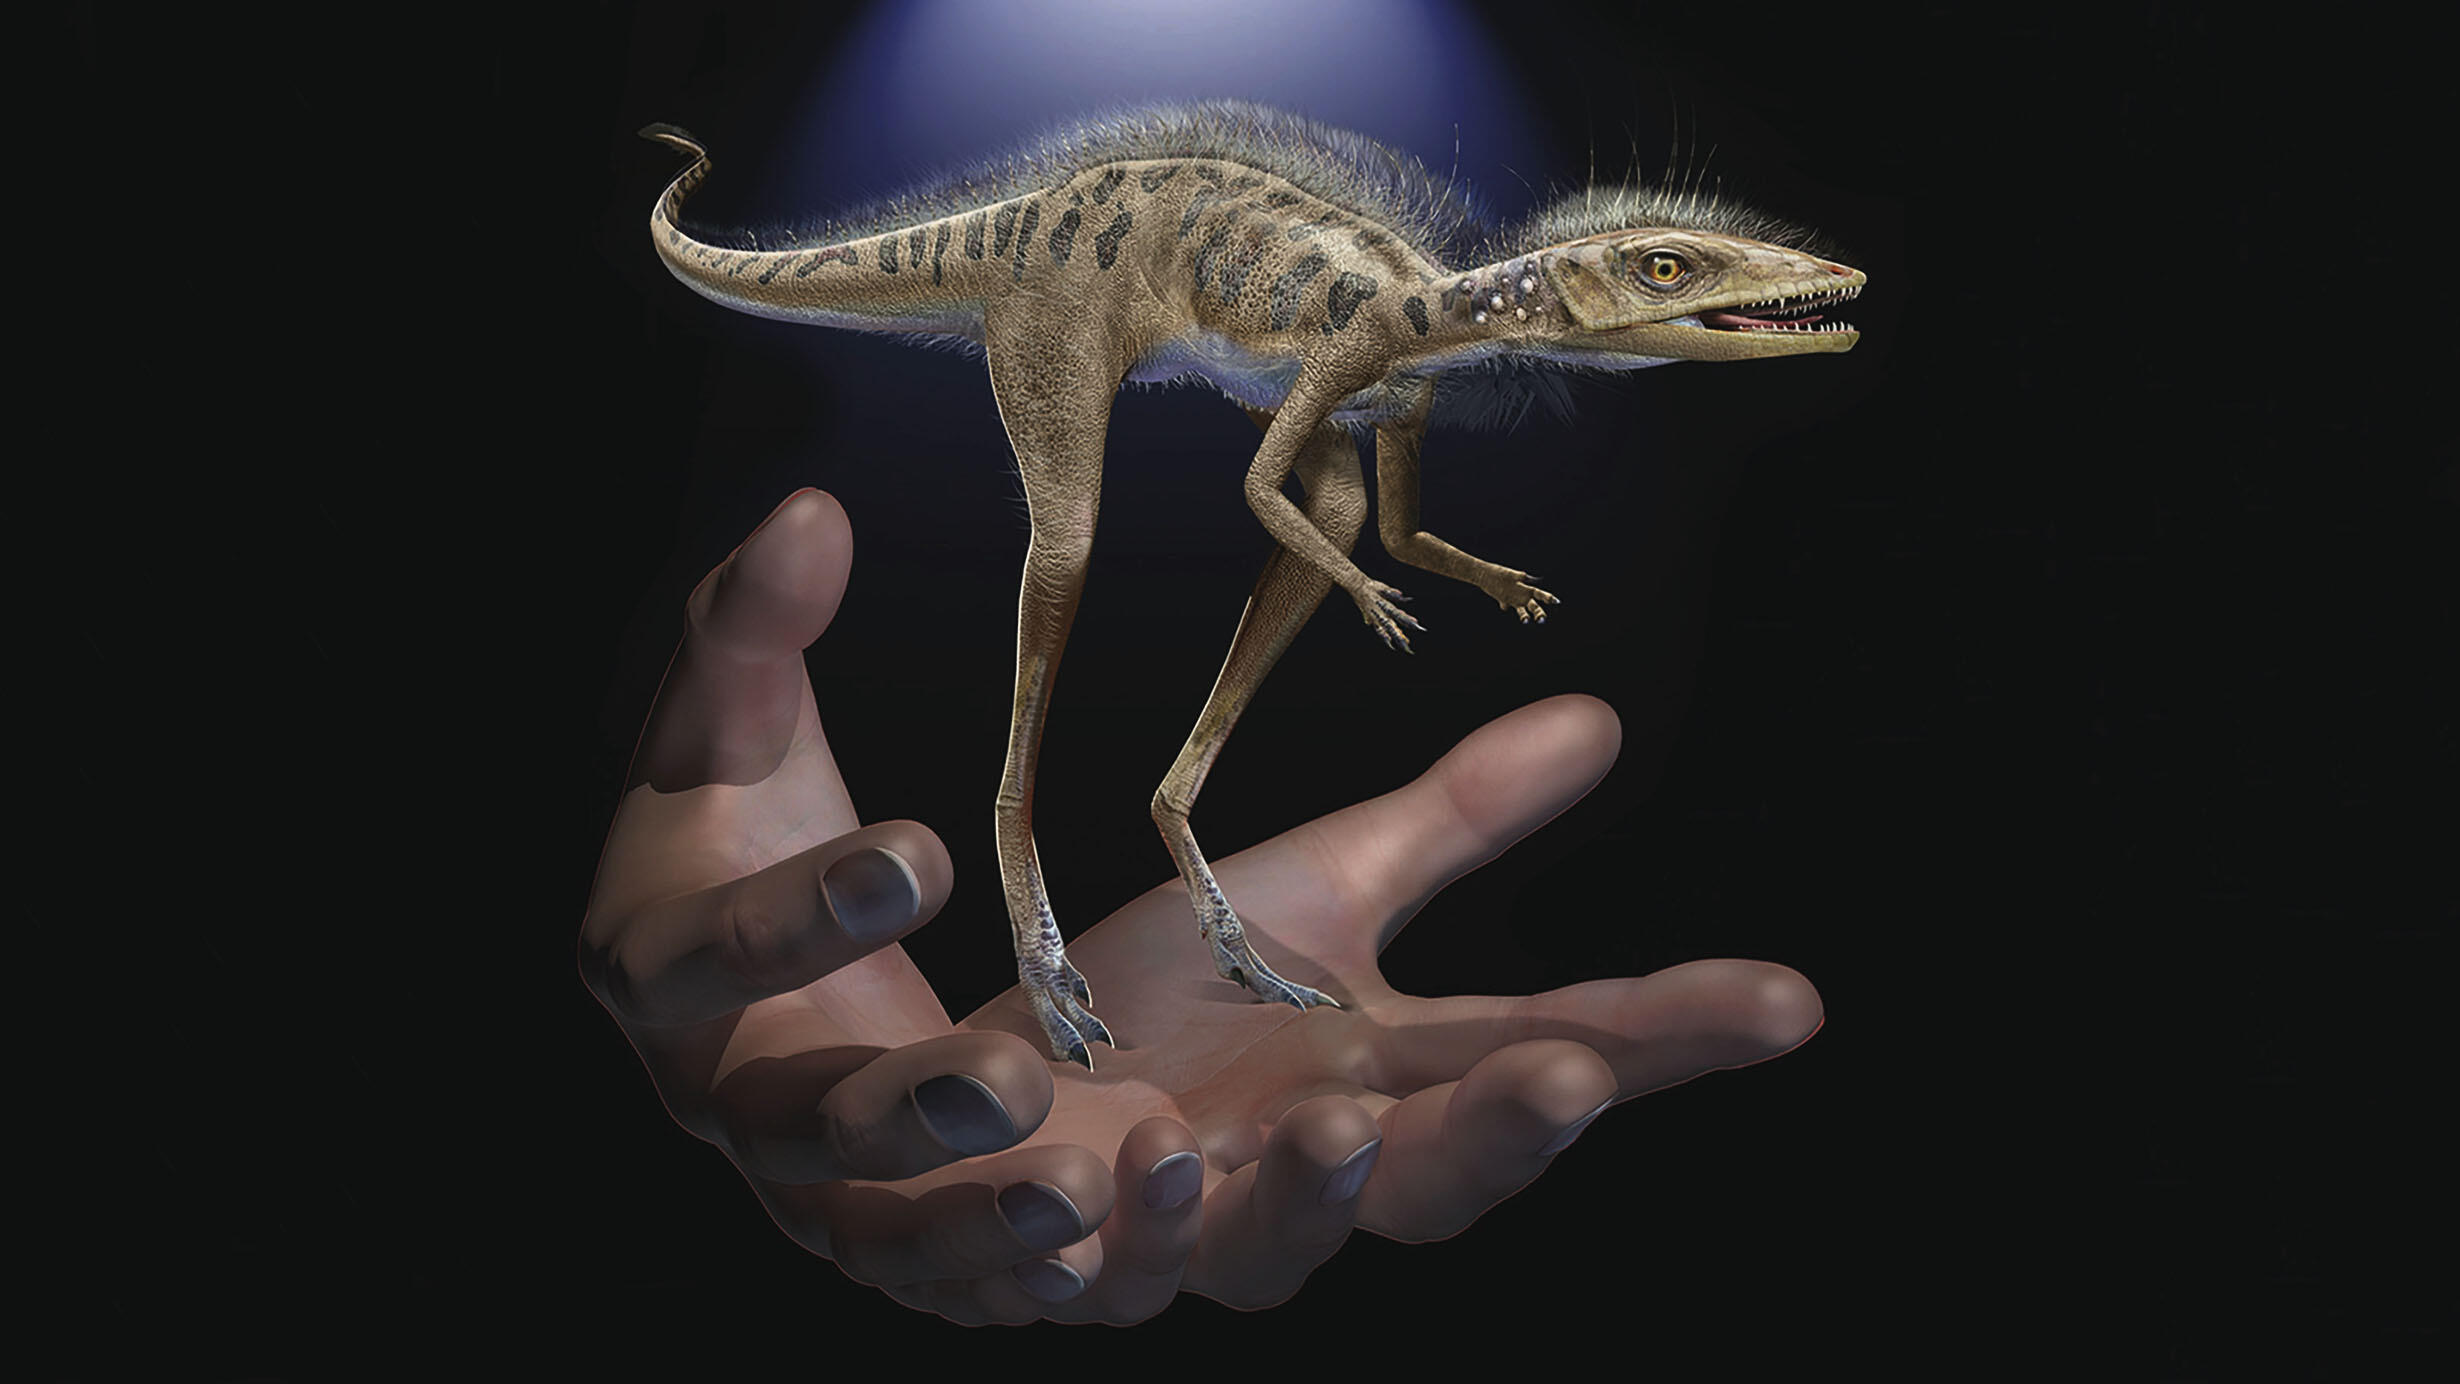 Rendering depicts a pair of hands holding the tiny Kongonaphon kely.